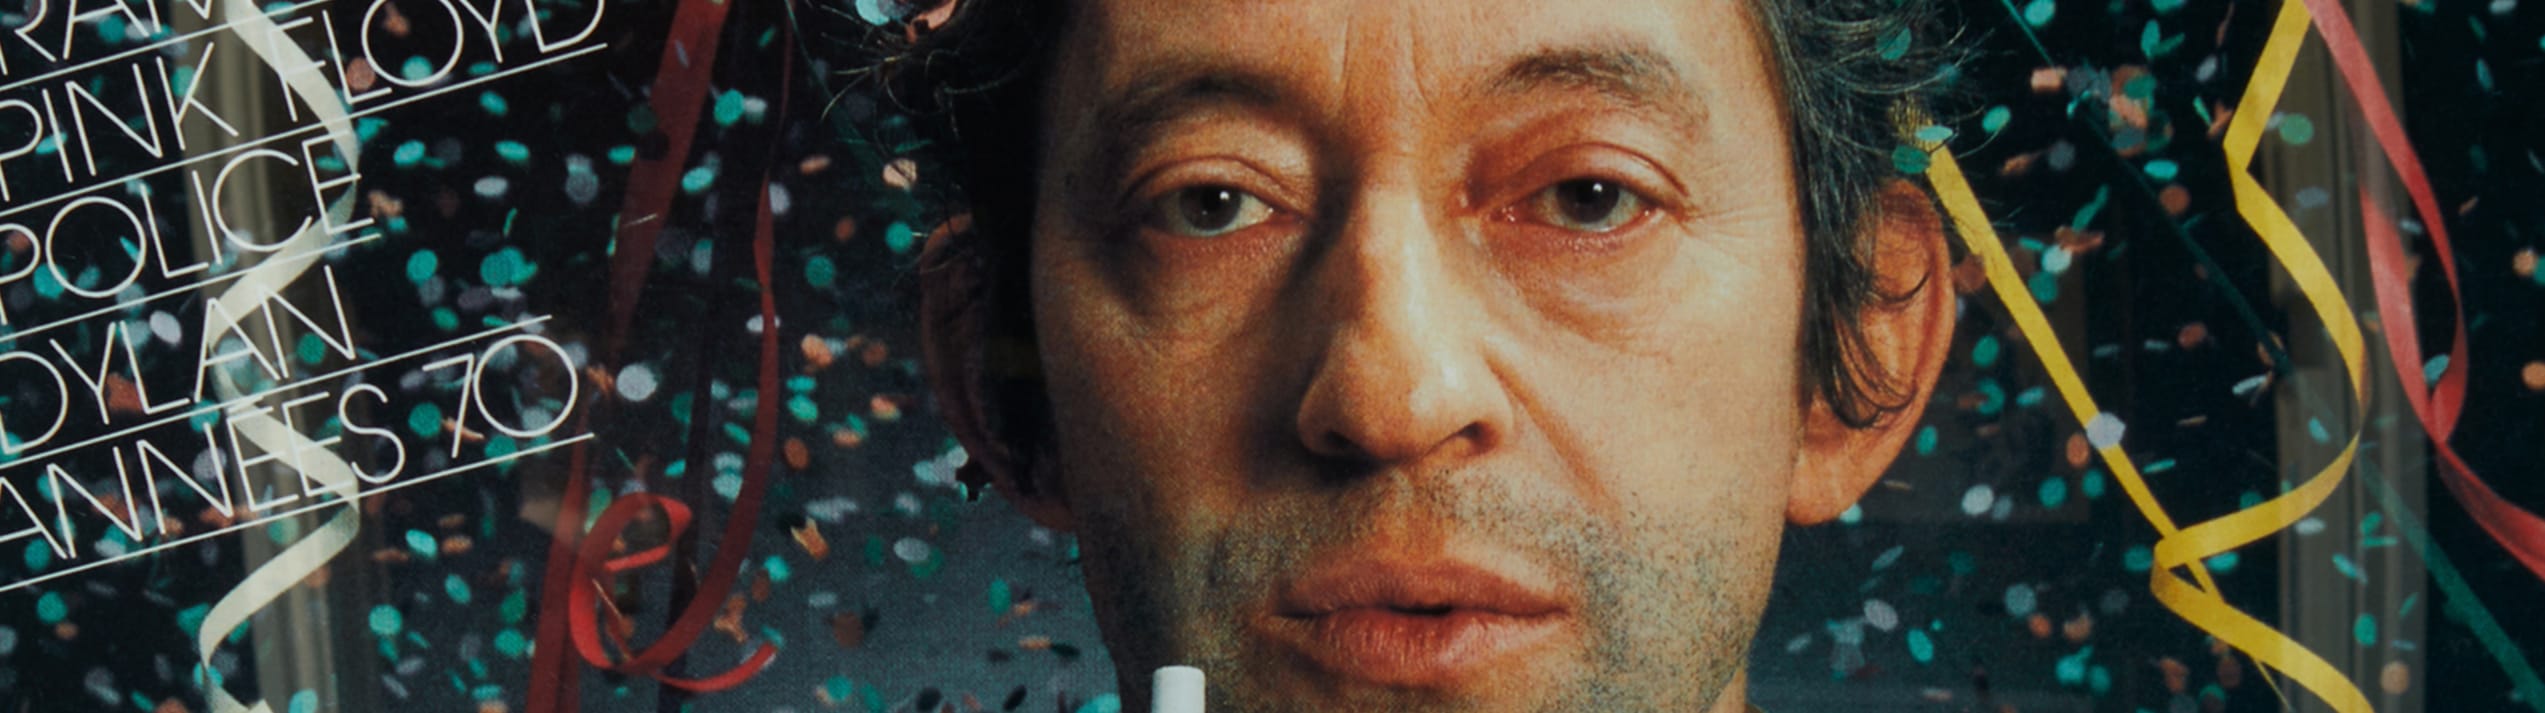 Read more about Step inside Serge Gainsbourg’s legendary home in Paris